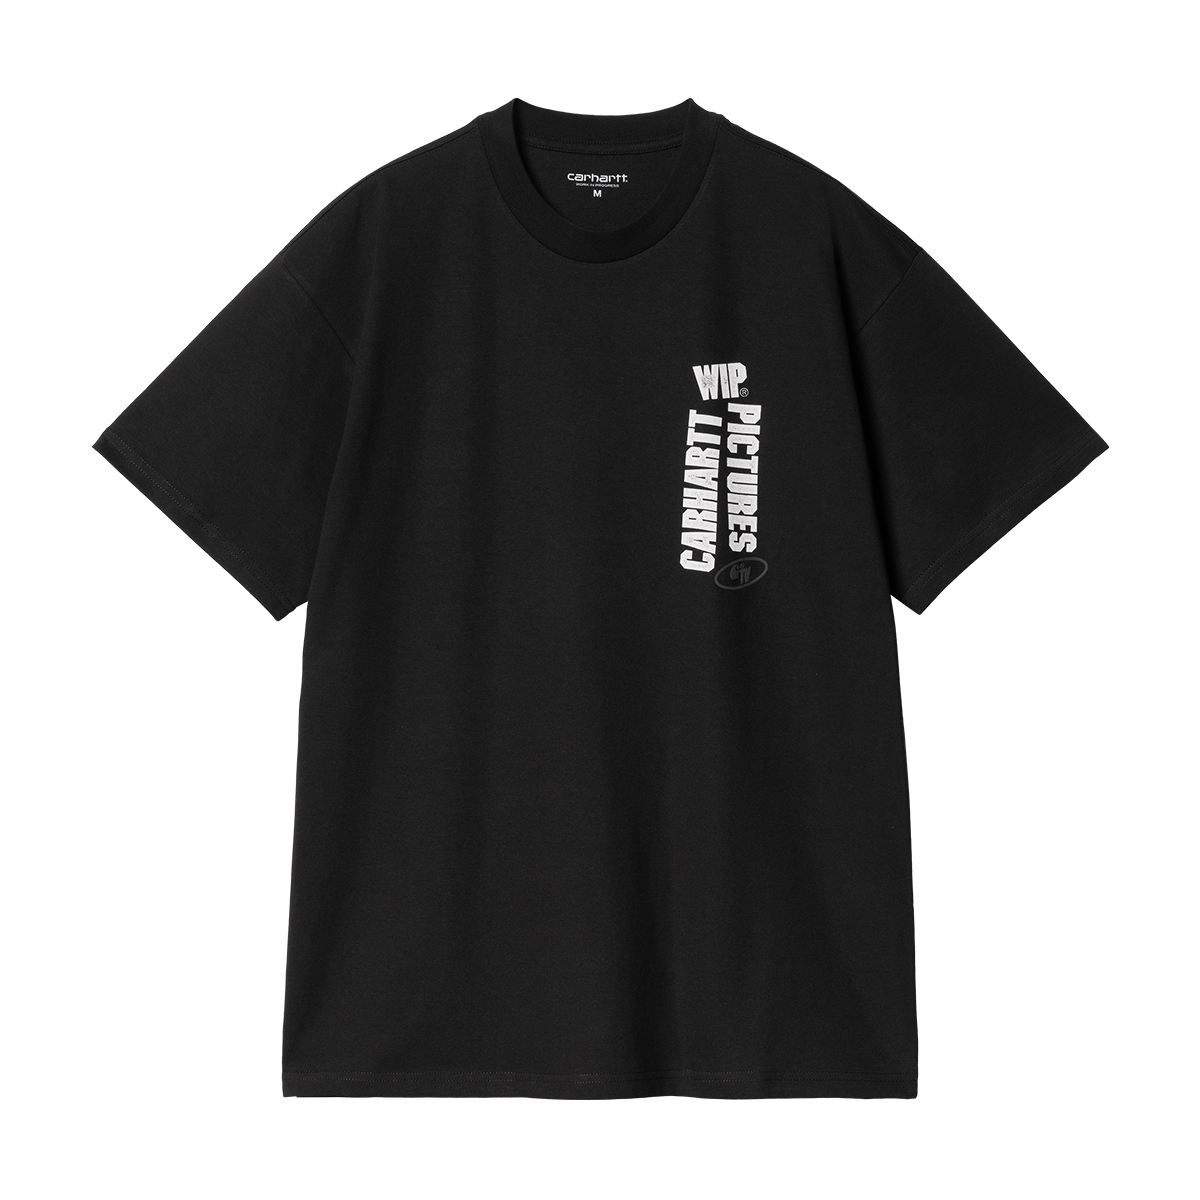 S/S Wip Pictures T-Shirt